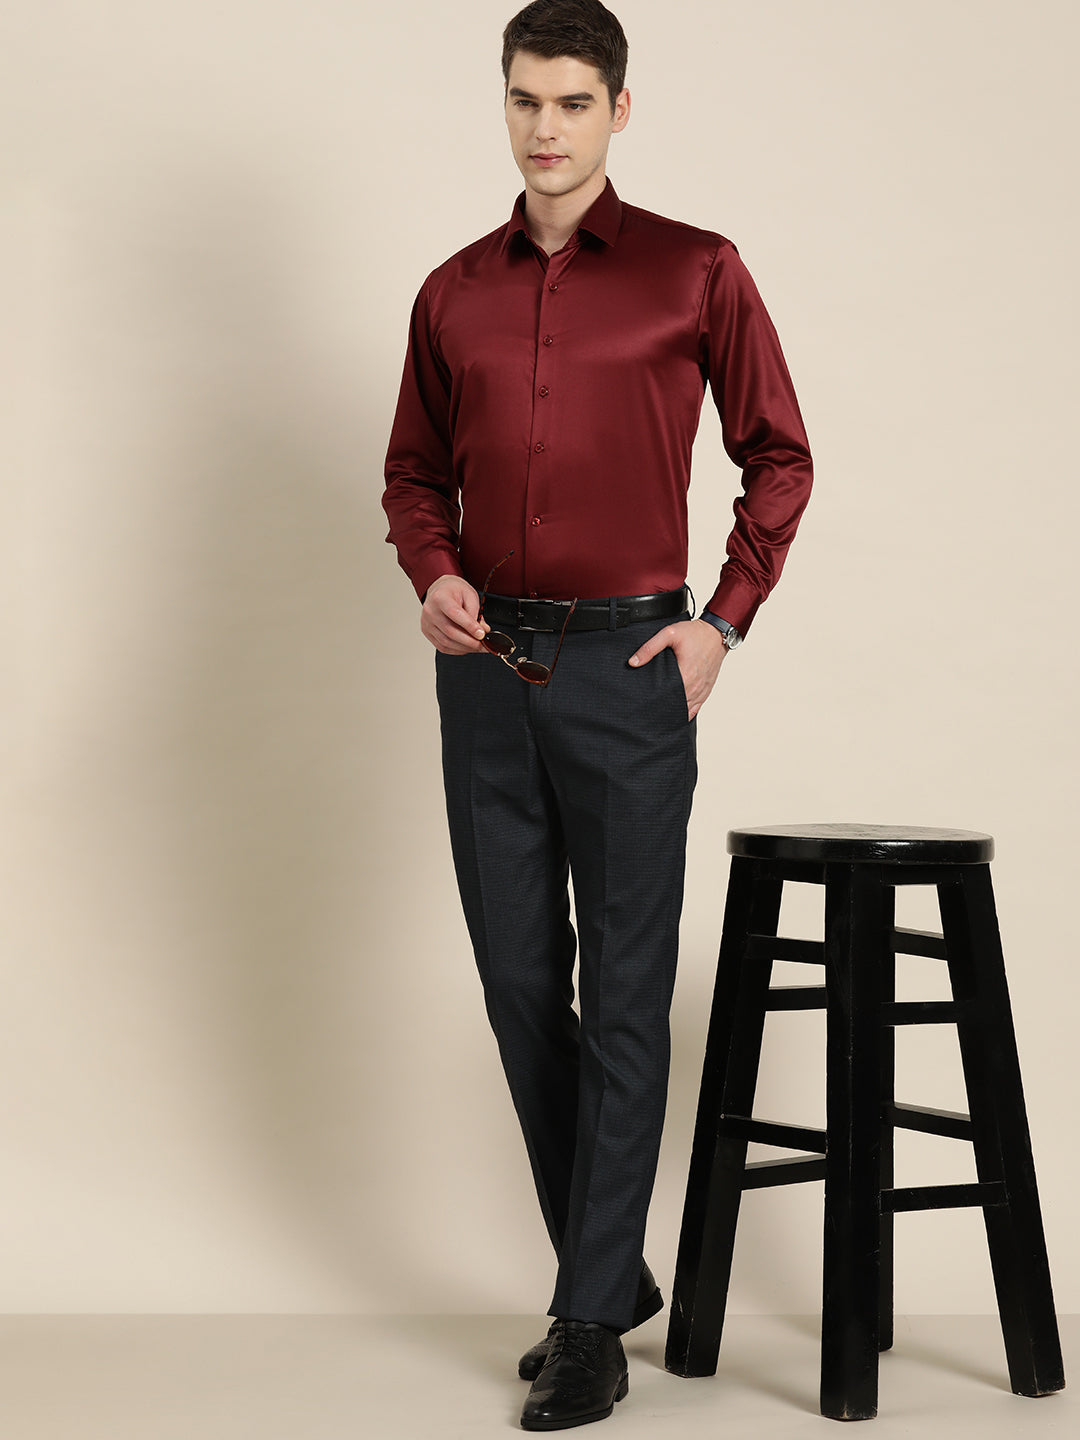 Maroon and black outfit, men. | Black outfit men, Red shirt men, Mens  outfits